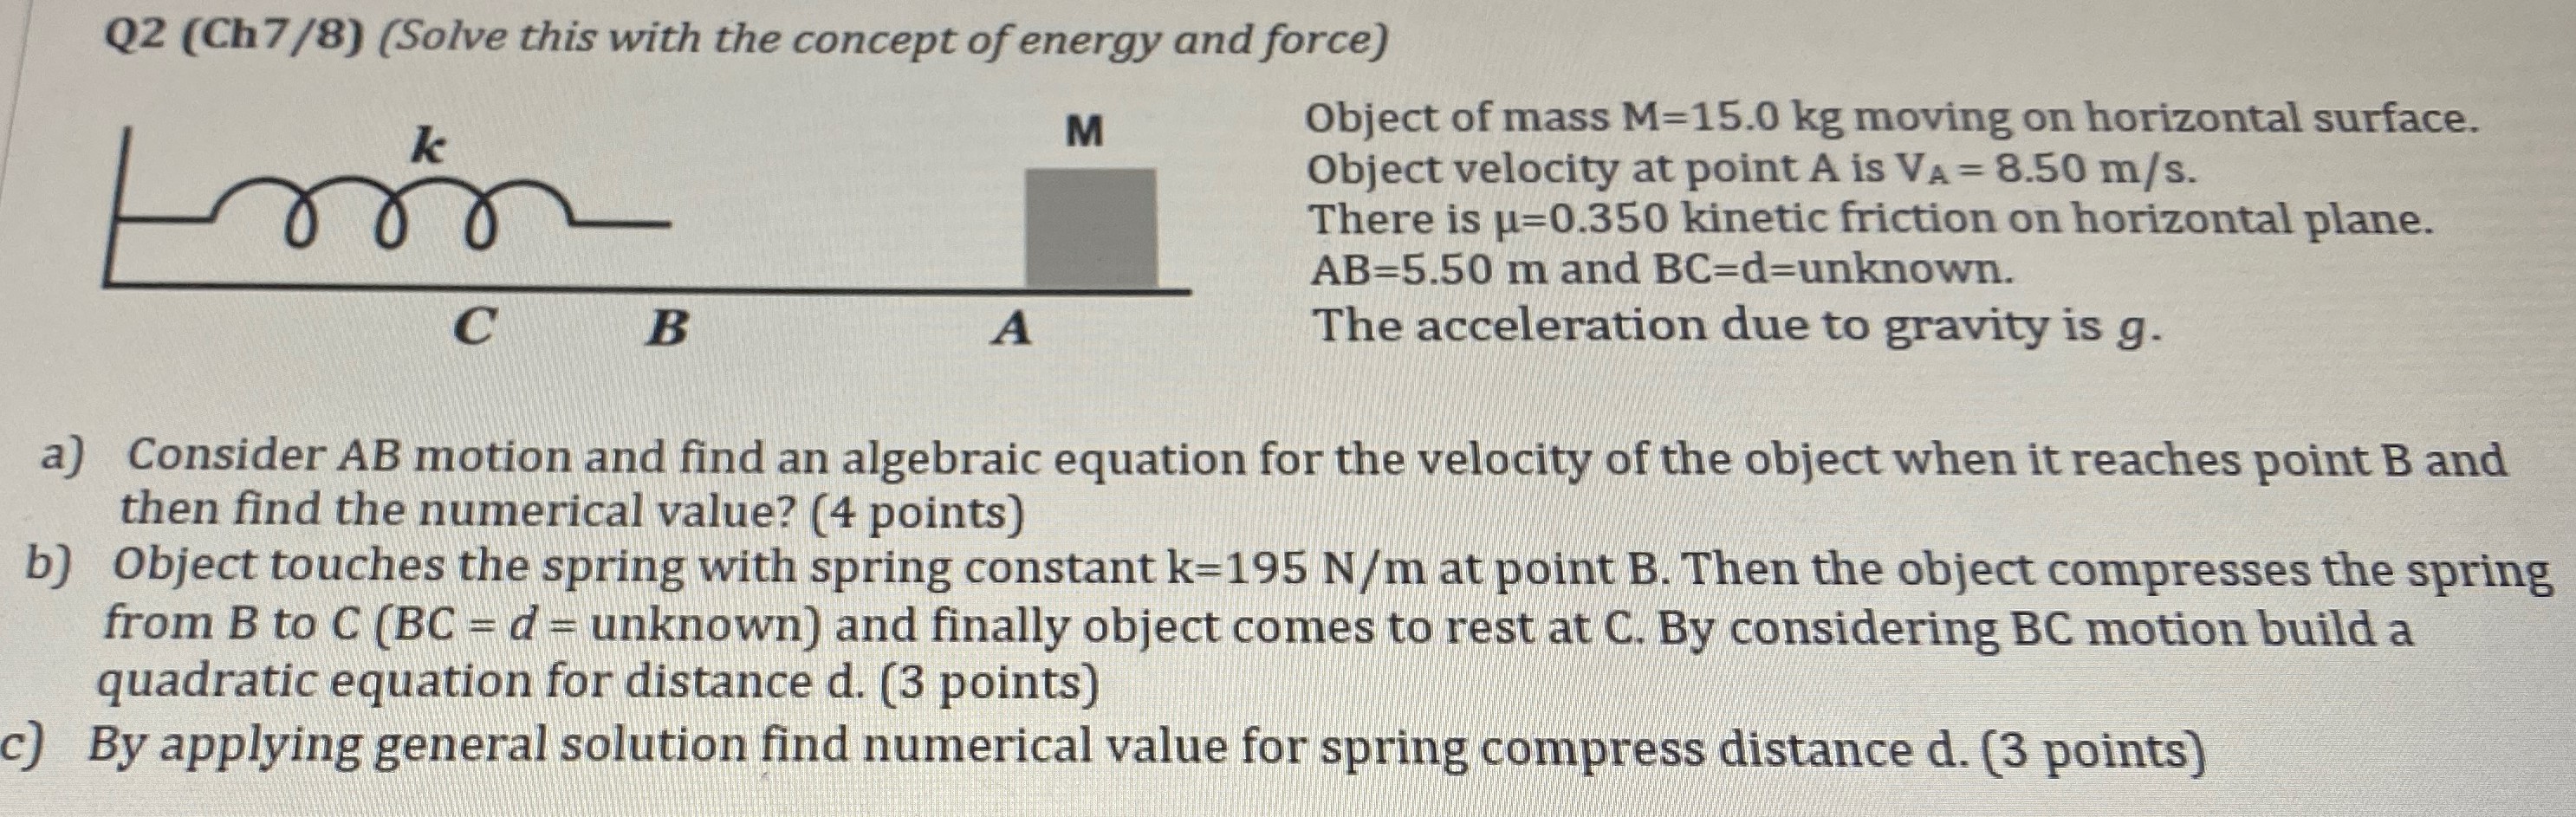 Q2 (Ch7/8) (Solve this with the concept of energy and force) Object of mass M = 15.0 kg moving on horizontal surface. Object velocity at point A is VA = 8.50 m/s. There is μ = 0.350 kinetic friction on horizontal plane. AB = 5.50 m and BC = d = unknown. The acceleration due to gravity is g. a) Consider AB motion and find an algebraic equation for the velocity of the object when it reaches point B and then find the numerical value? (4 points) b) Object touches the spring with spring constant k = 195 N/m at point B. Then the object compresses the spring from B to C(BC = d = unknown) and finally object comes to rest at C. By considering BC motion build a quadratic equation for distance d. (3 points) c) By applying general solution find numerical value for spring compress distance d. (3 points)